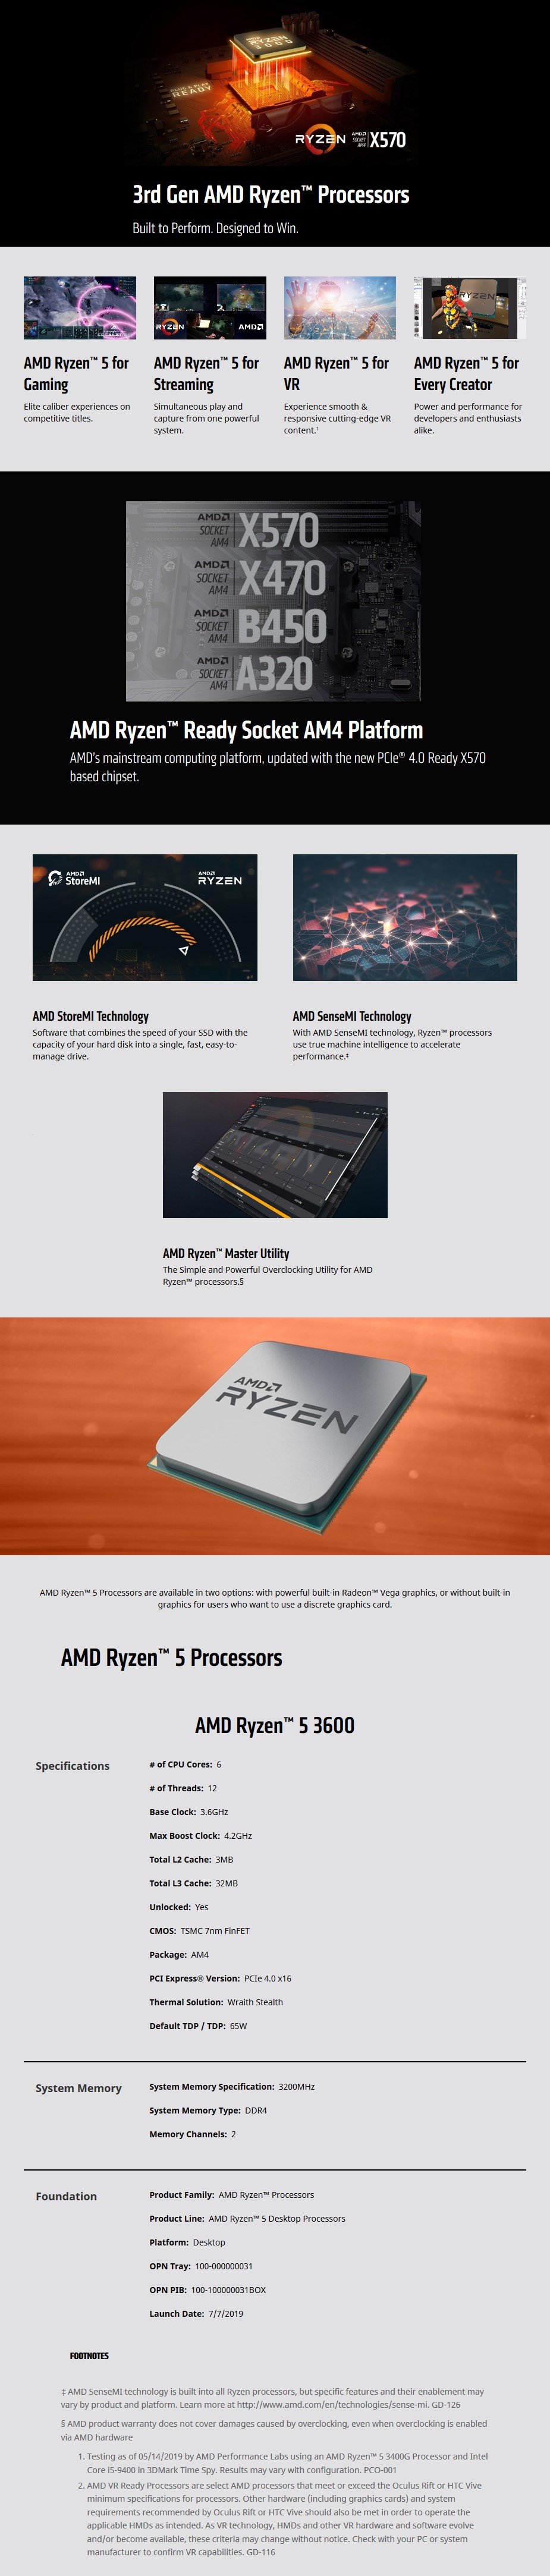 Amd Ryzen 5 1400 Processor With Wraith Stealth Cooler / The